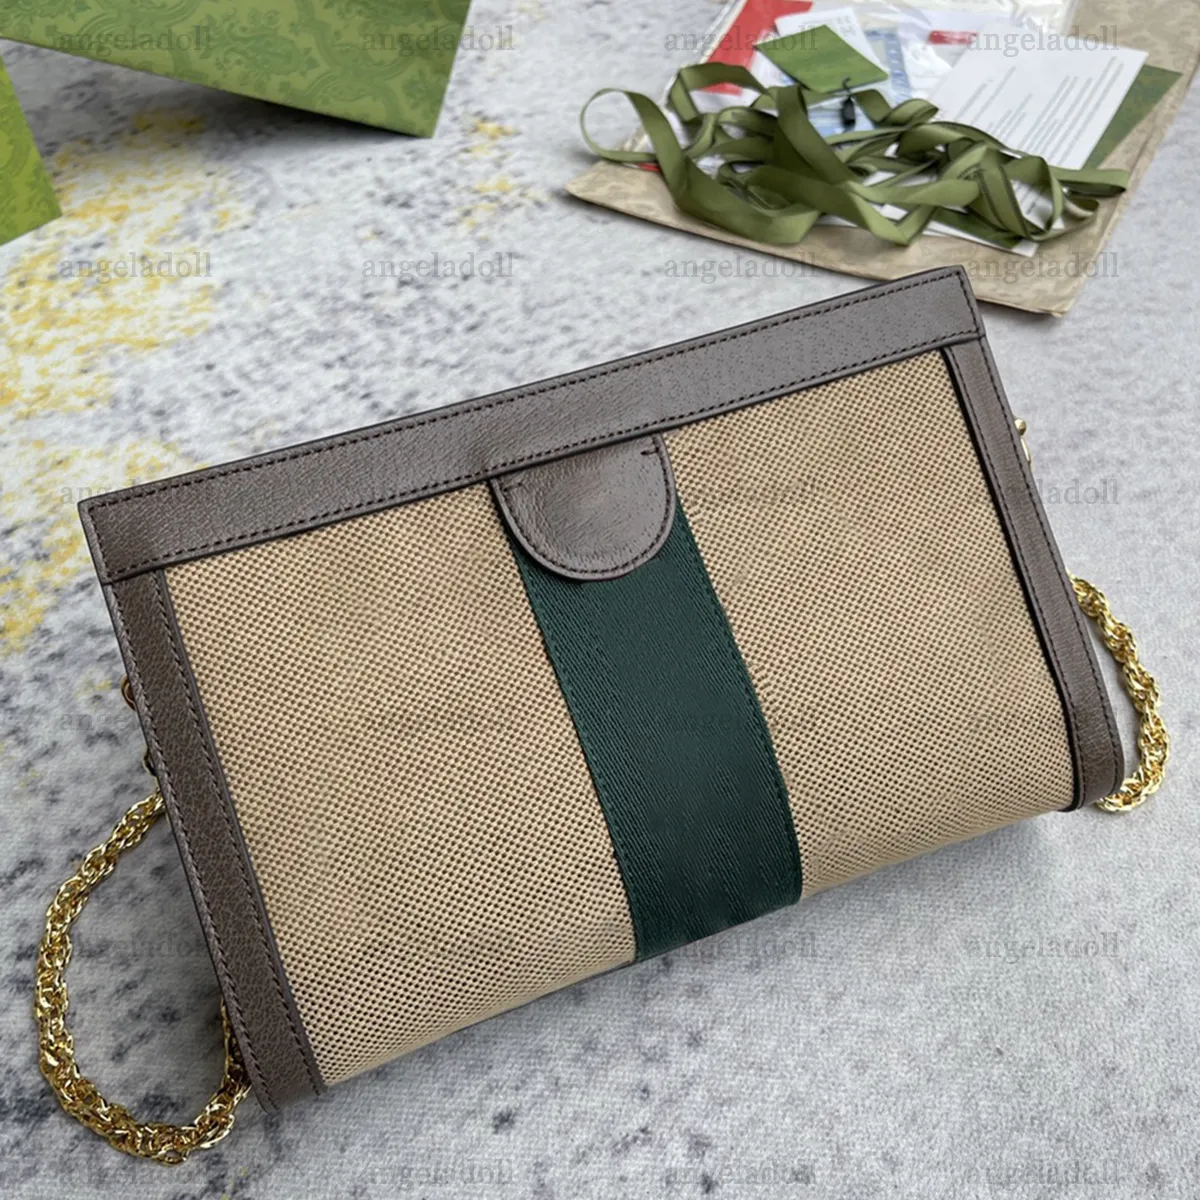 10A Mirror Quality Designers Small Chain Bag 26cm Womens Canvas Purse Jumbo Letters Brown Leather Trim Handbag Messengers Bags Crossbody Shoulder Bag With Box